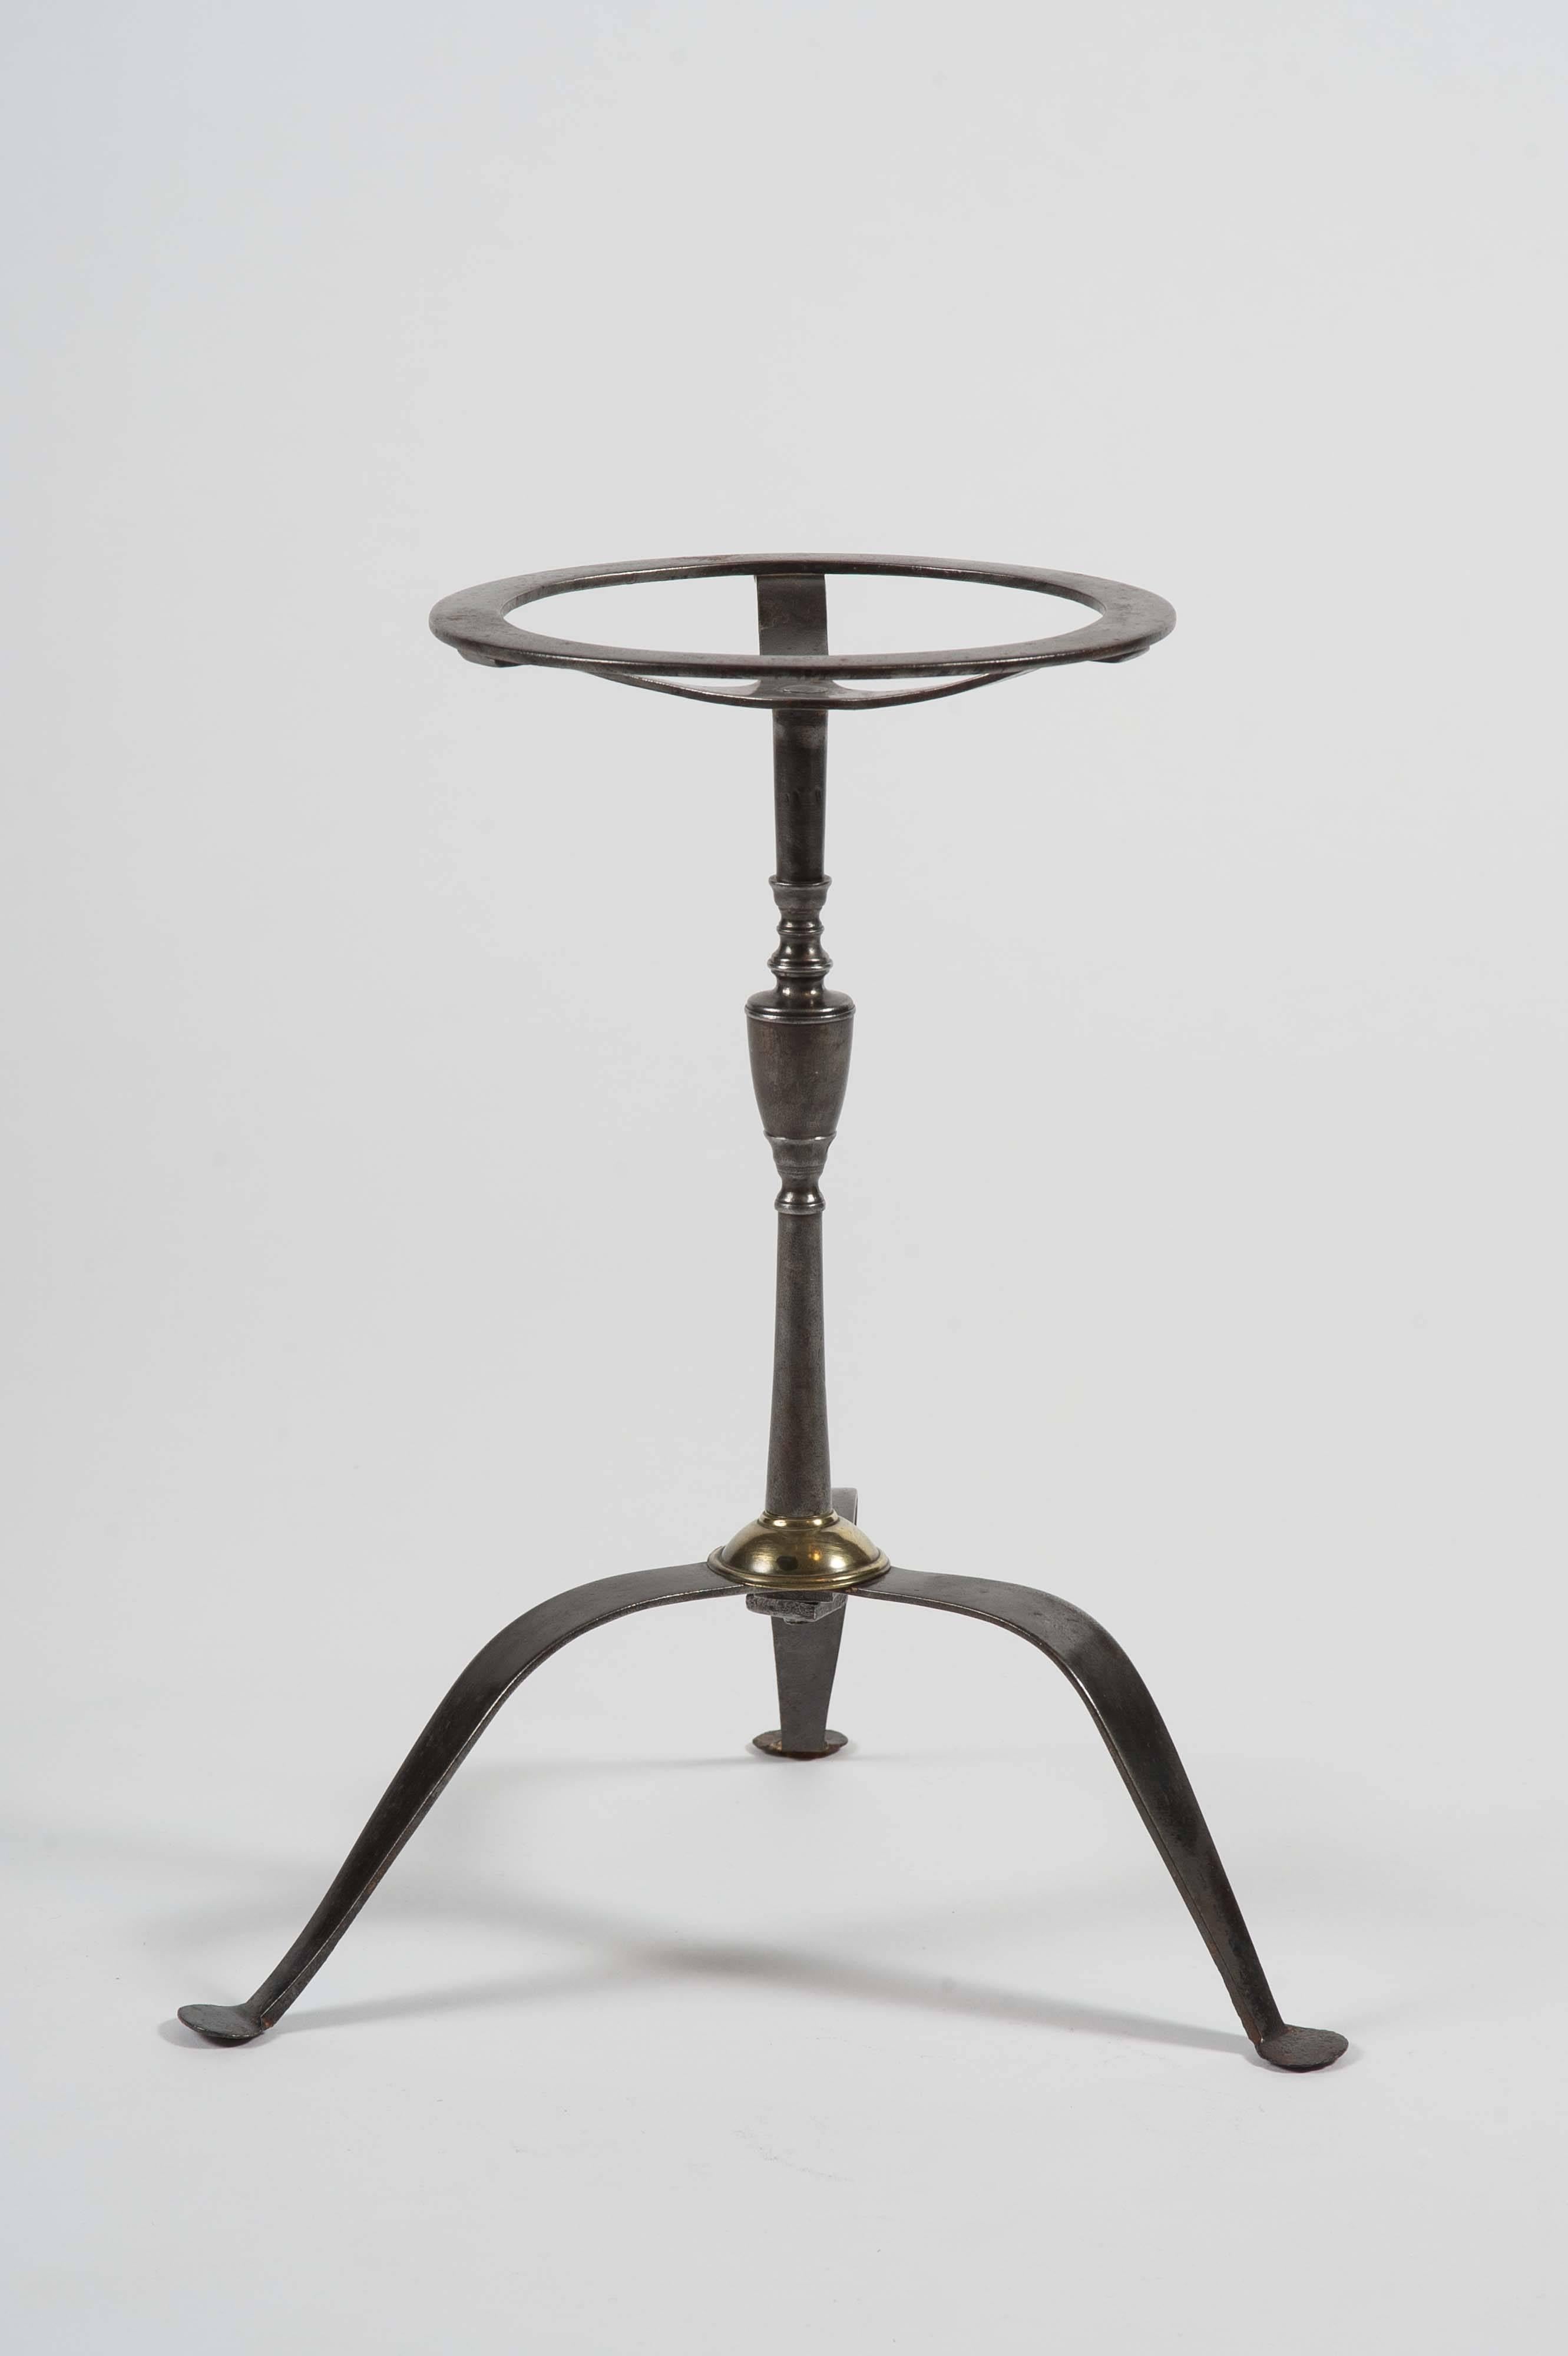 A George III period steel trivet with a beautifully turned “vase” stem and pierced circular top on tripod legs. Made to hold plates or kettles but an ideal ice bucket Stand. Diameter of top: 7.75